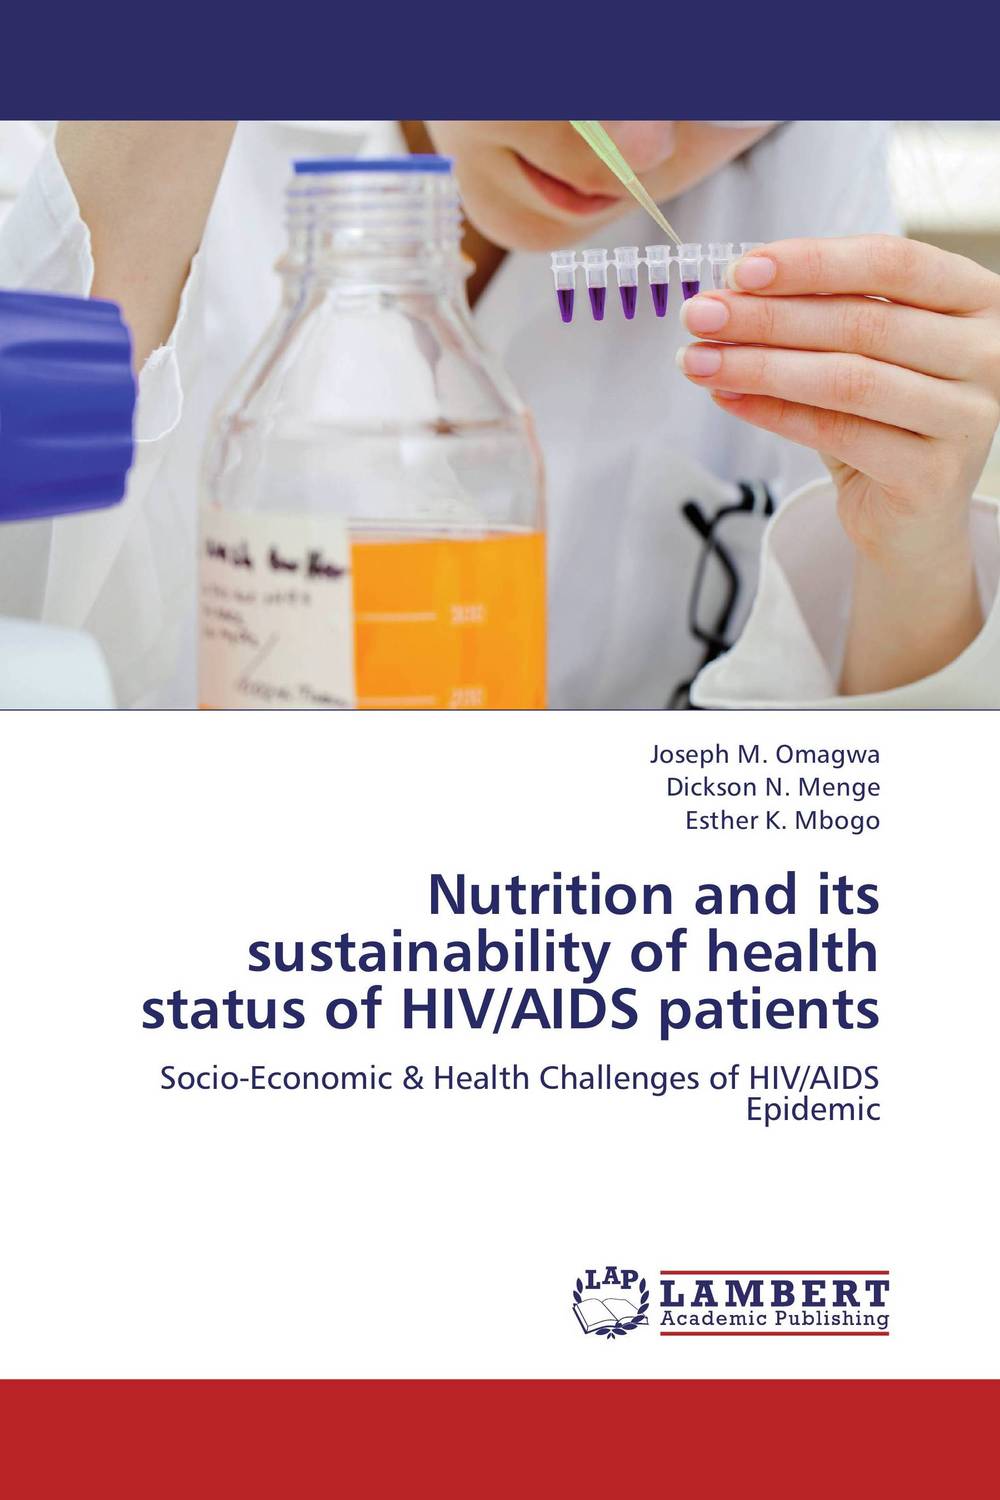 Nutrition and its sustainability of health status of HIV/AIDS patients